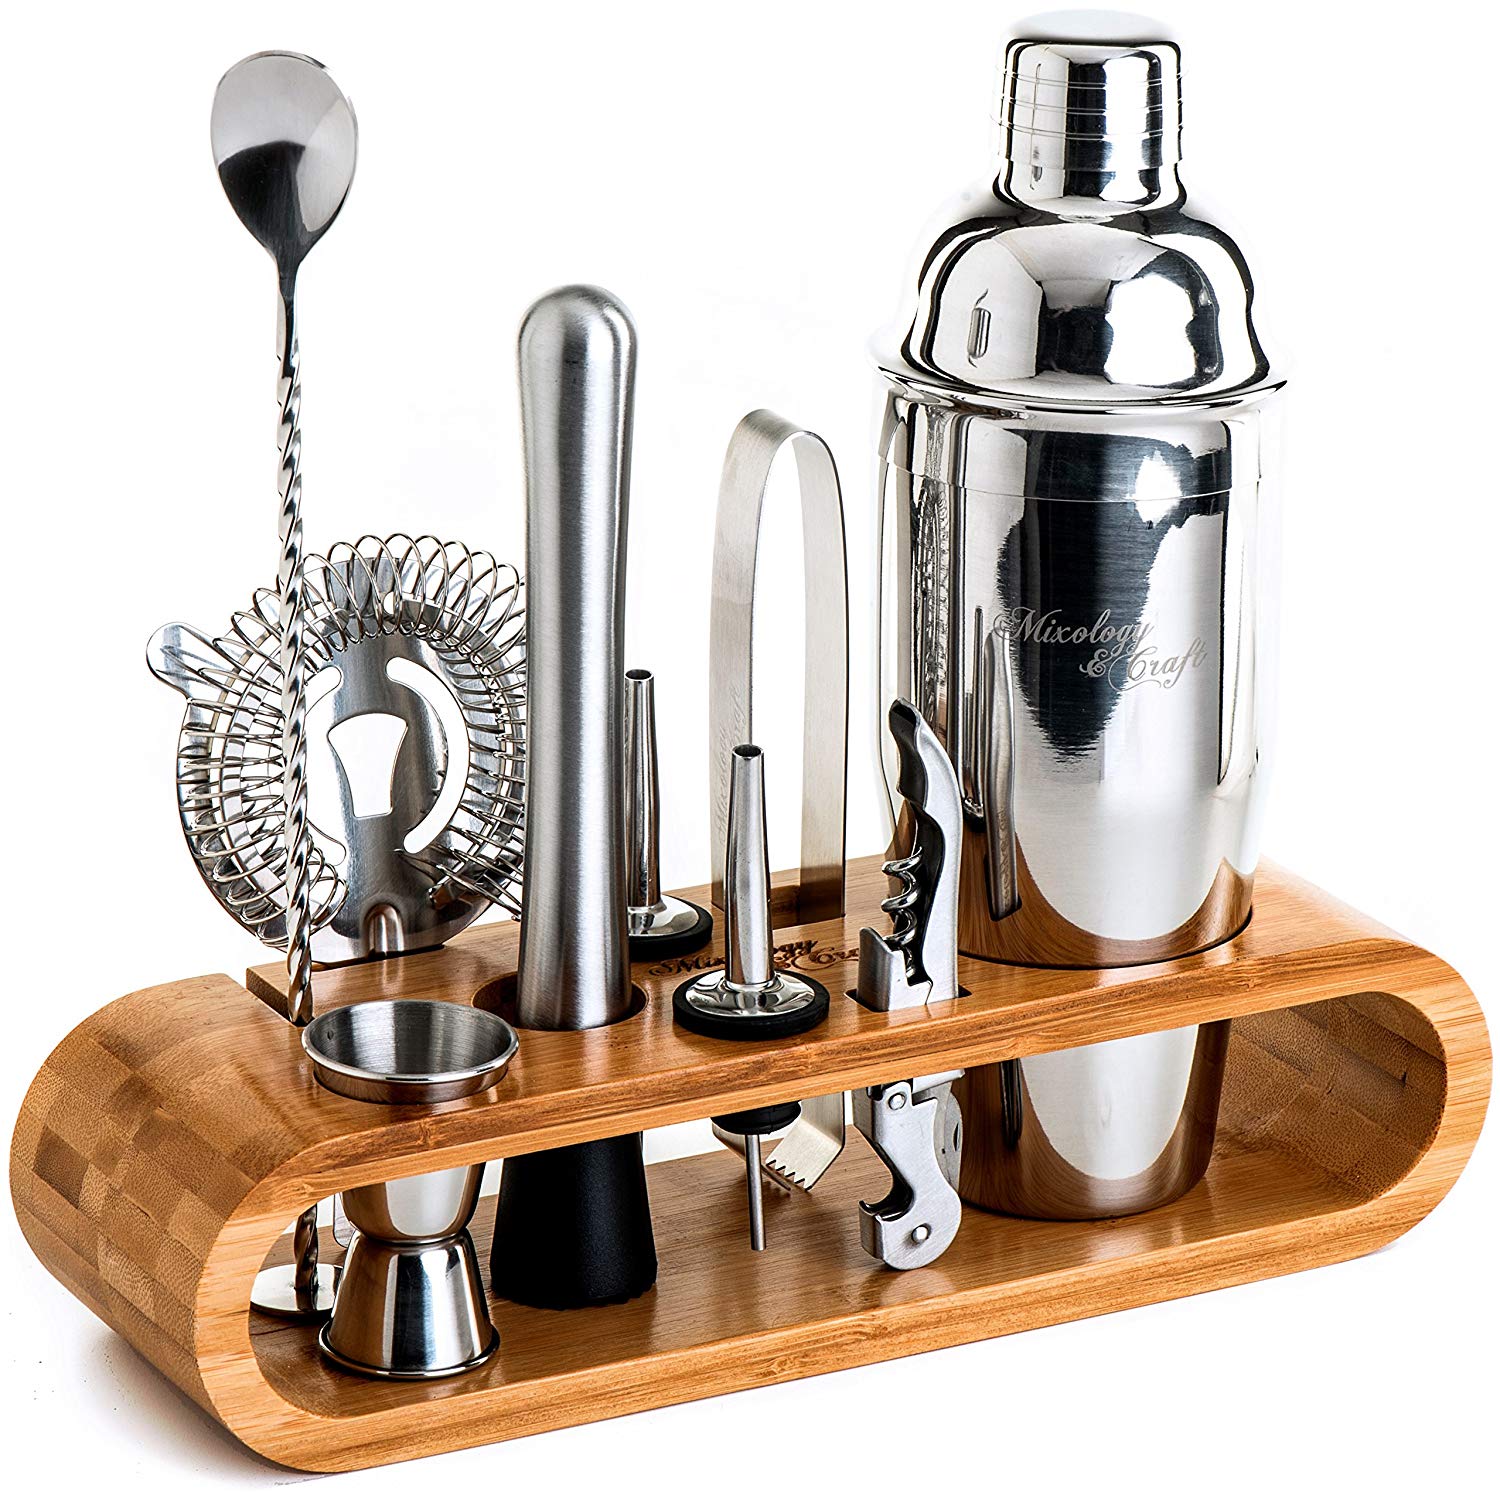 Mixology Bartender Kit: 10-Piece Bar Tool Set with Stylish Bamboo Stand - Perfect Home Bartending Kit and Martini Cocktail Shaker Set For an Awesome Drink Mixing Experience - Exclusive Recipes Bonus